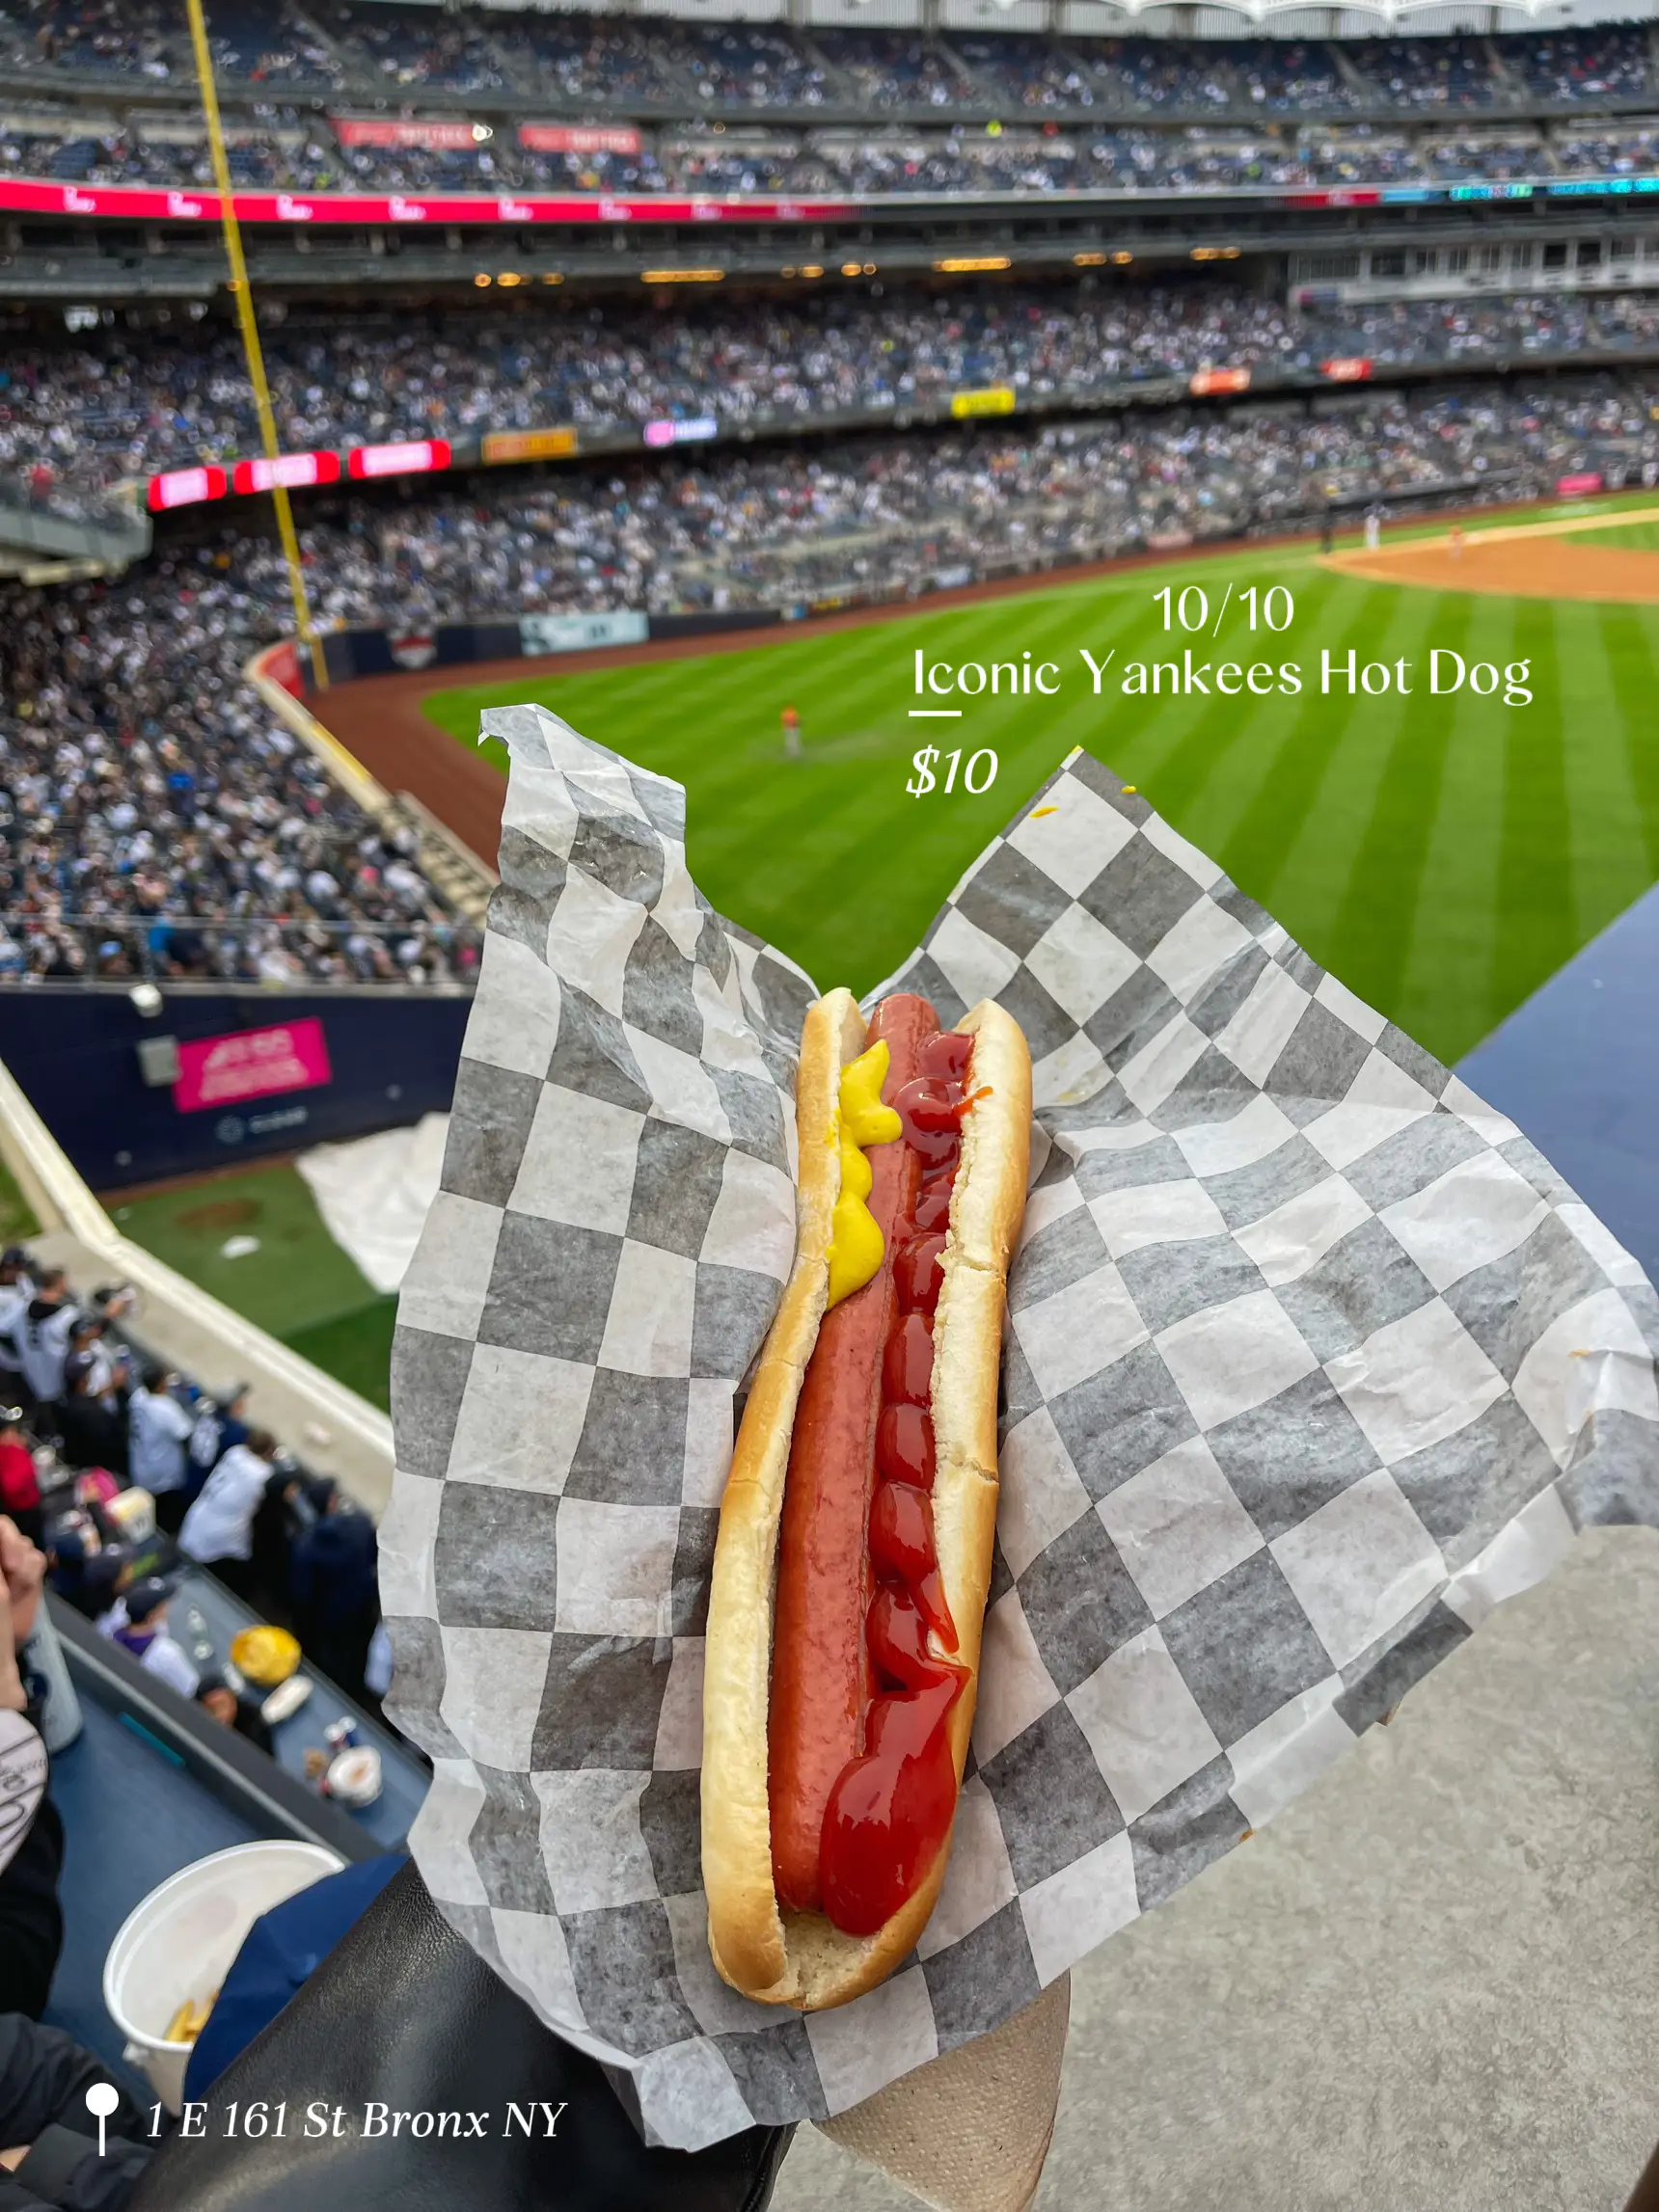  A Yankees hot dog in a bun with a price of $10.